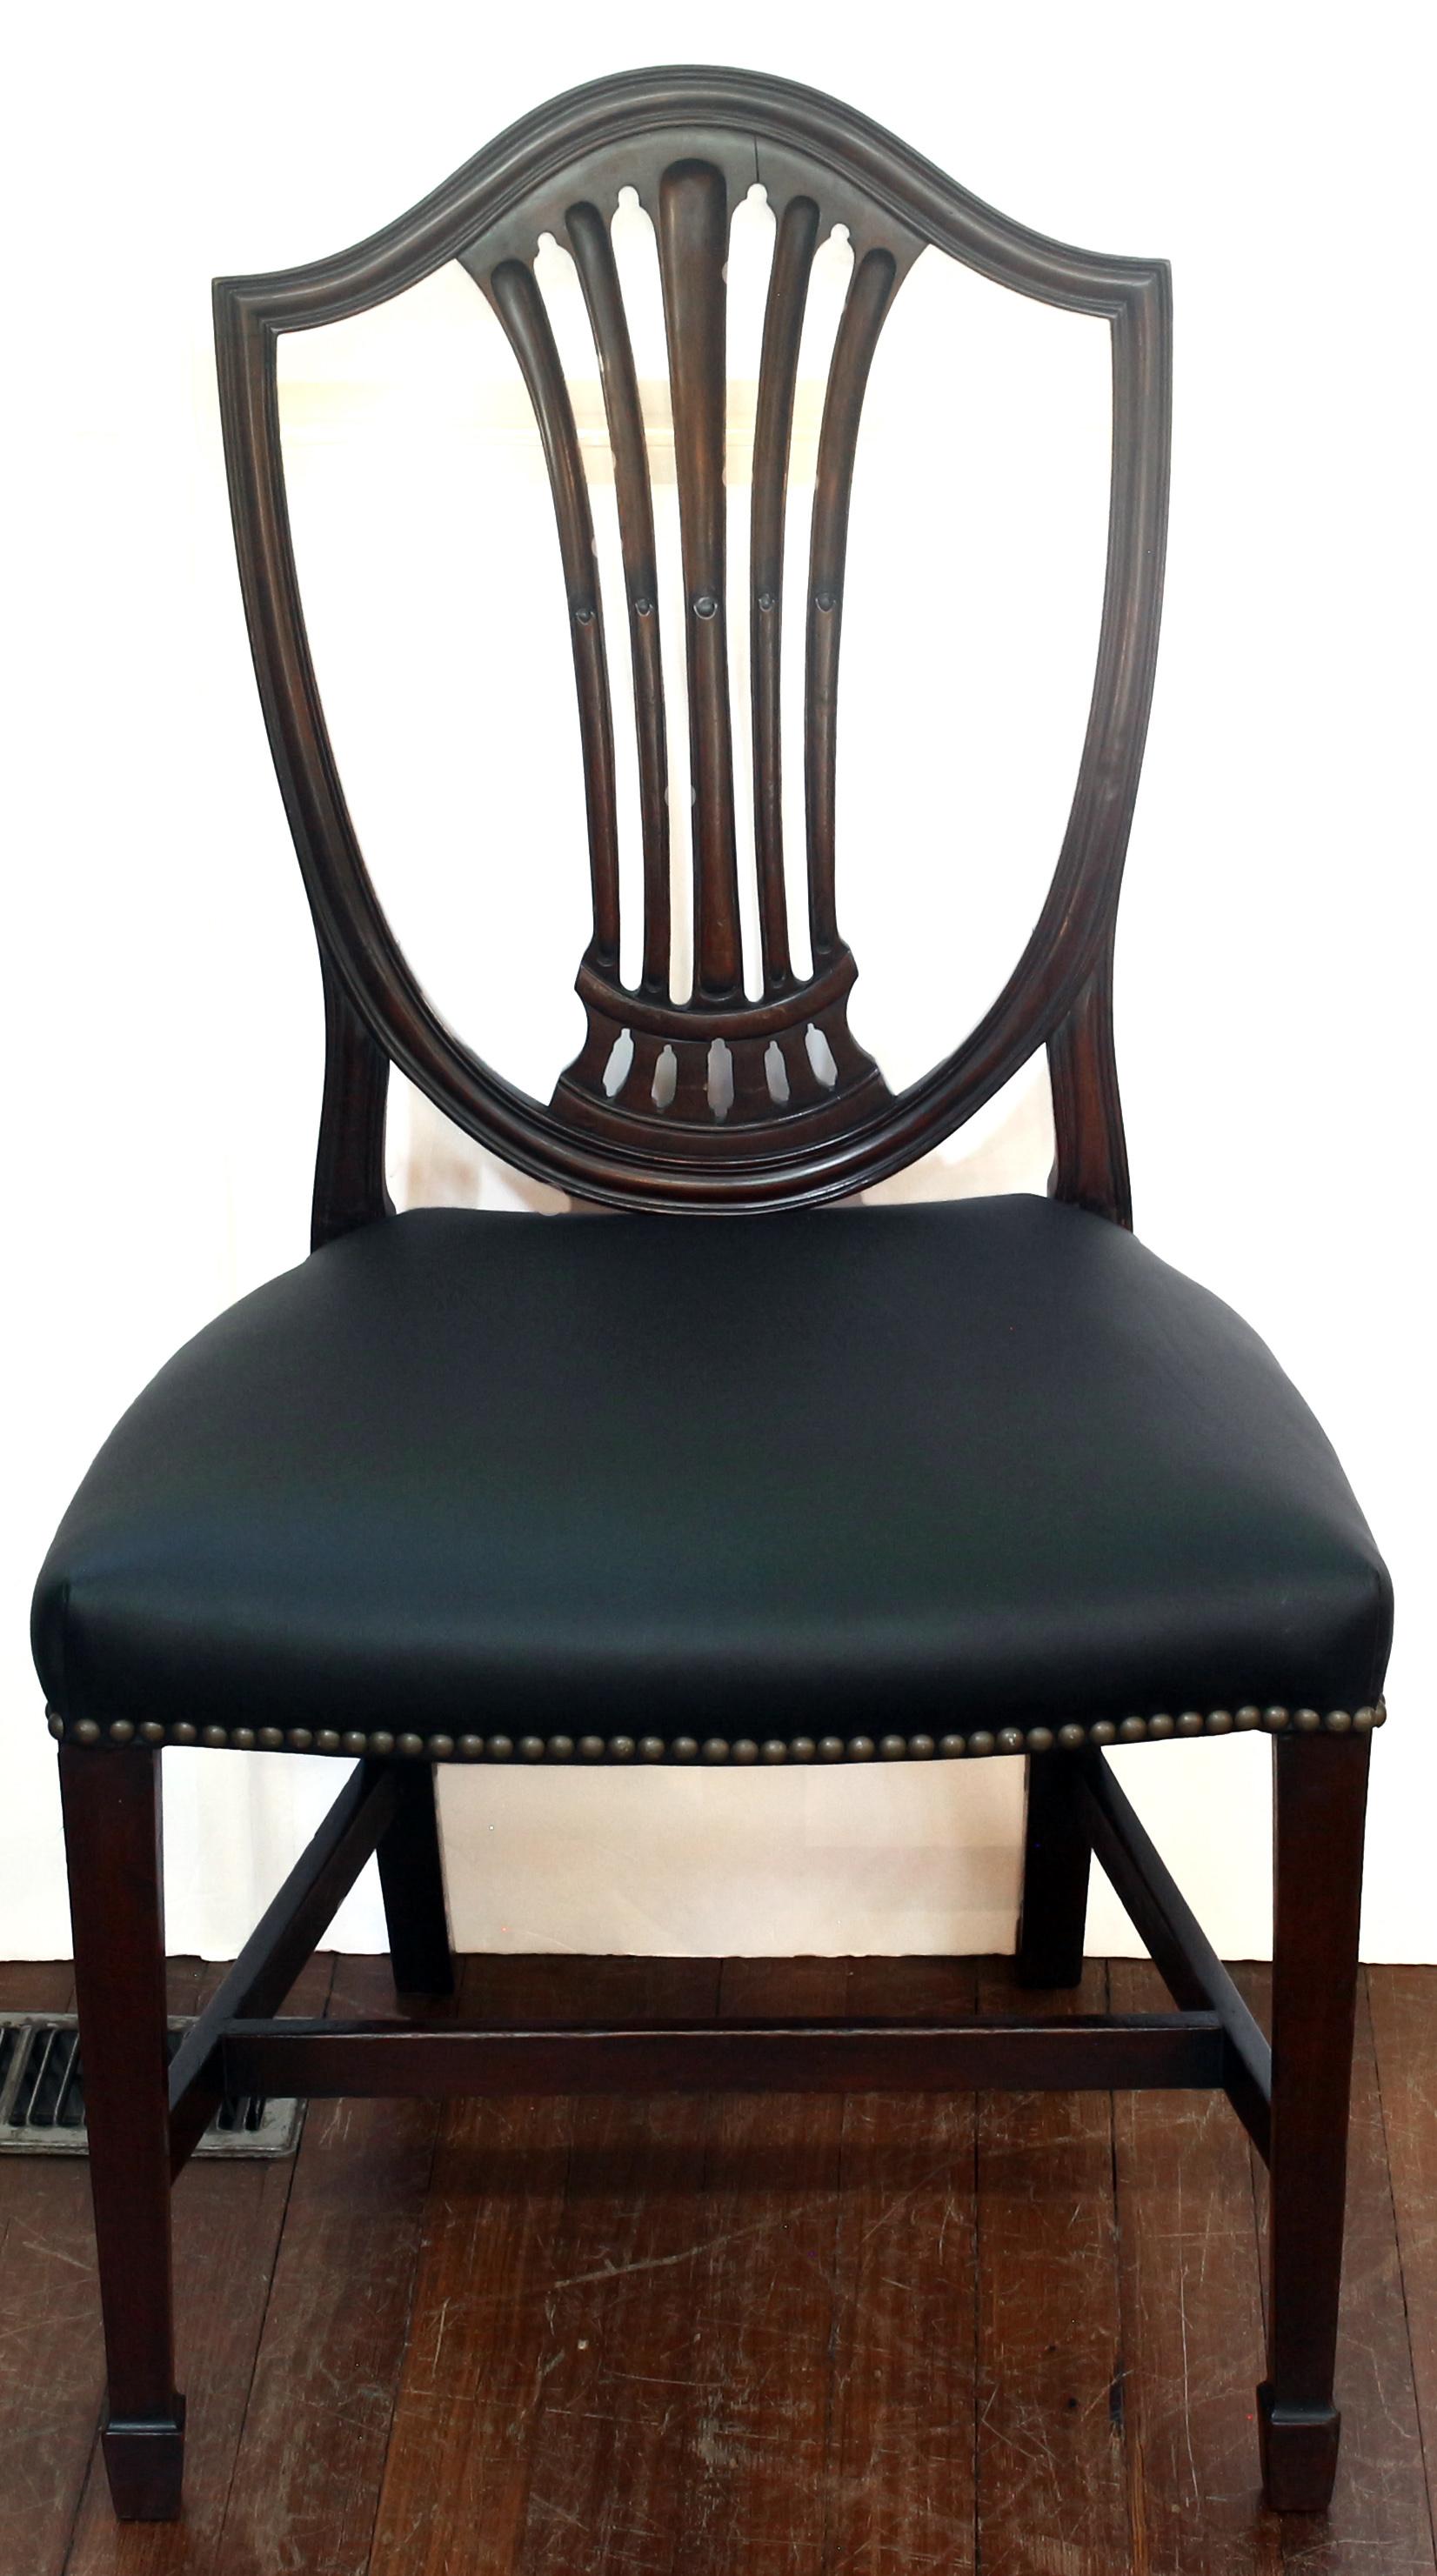 Late 19th century set of 8 Georgian style dining chairs, English. Hepplewhite style. Well molded shield backs & arms. Cut work, stop-fluted backsplats. Straight tapered legs ending in spade feet, stretchers. 1 side chair with old backsplat break